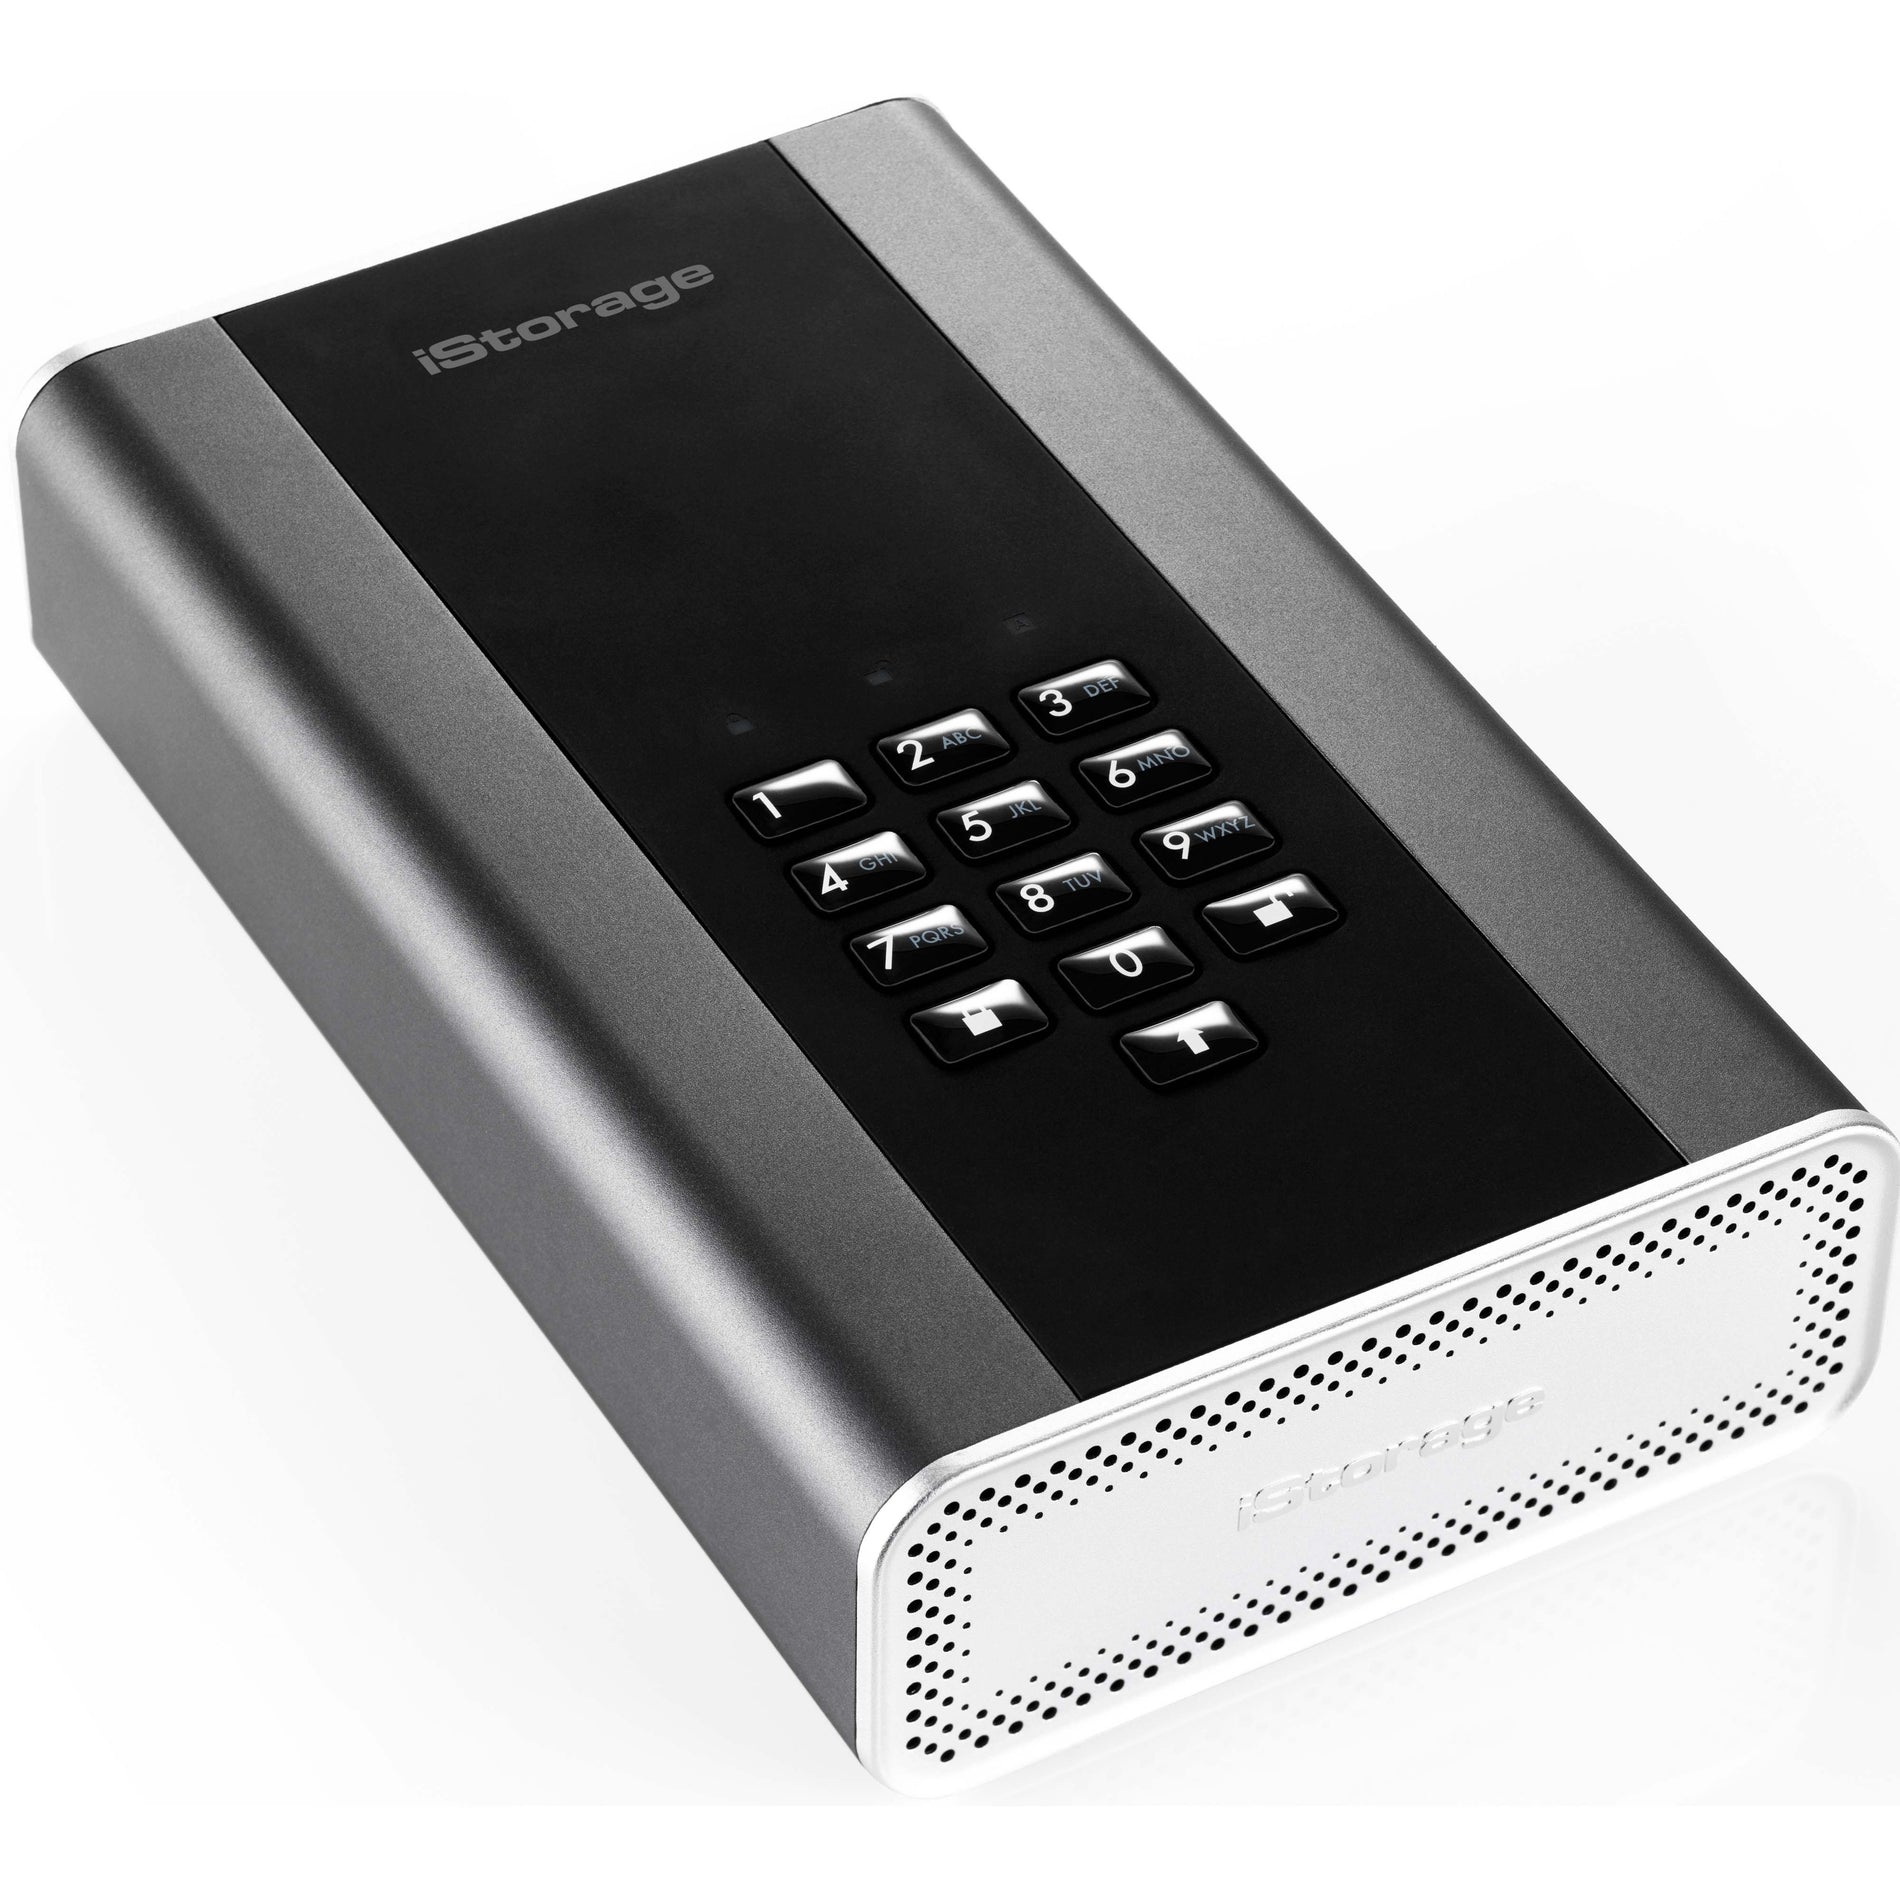 iStorage IS-DT2-256-18000-C-X diskAshur DT2 18 TB Secure Encrypted Desktop Hard Drive, FIPS Level-3, Password protected, Dust/Water Resistant